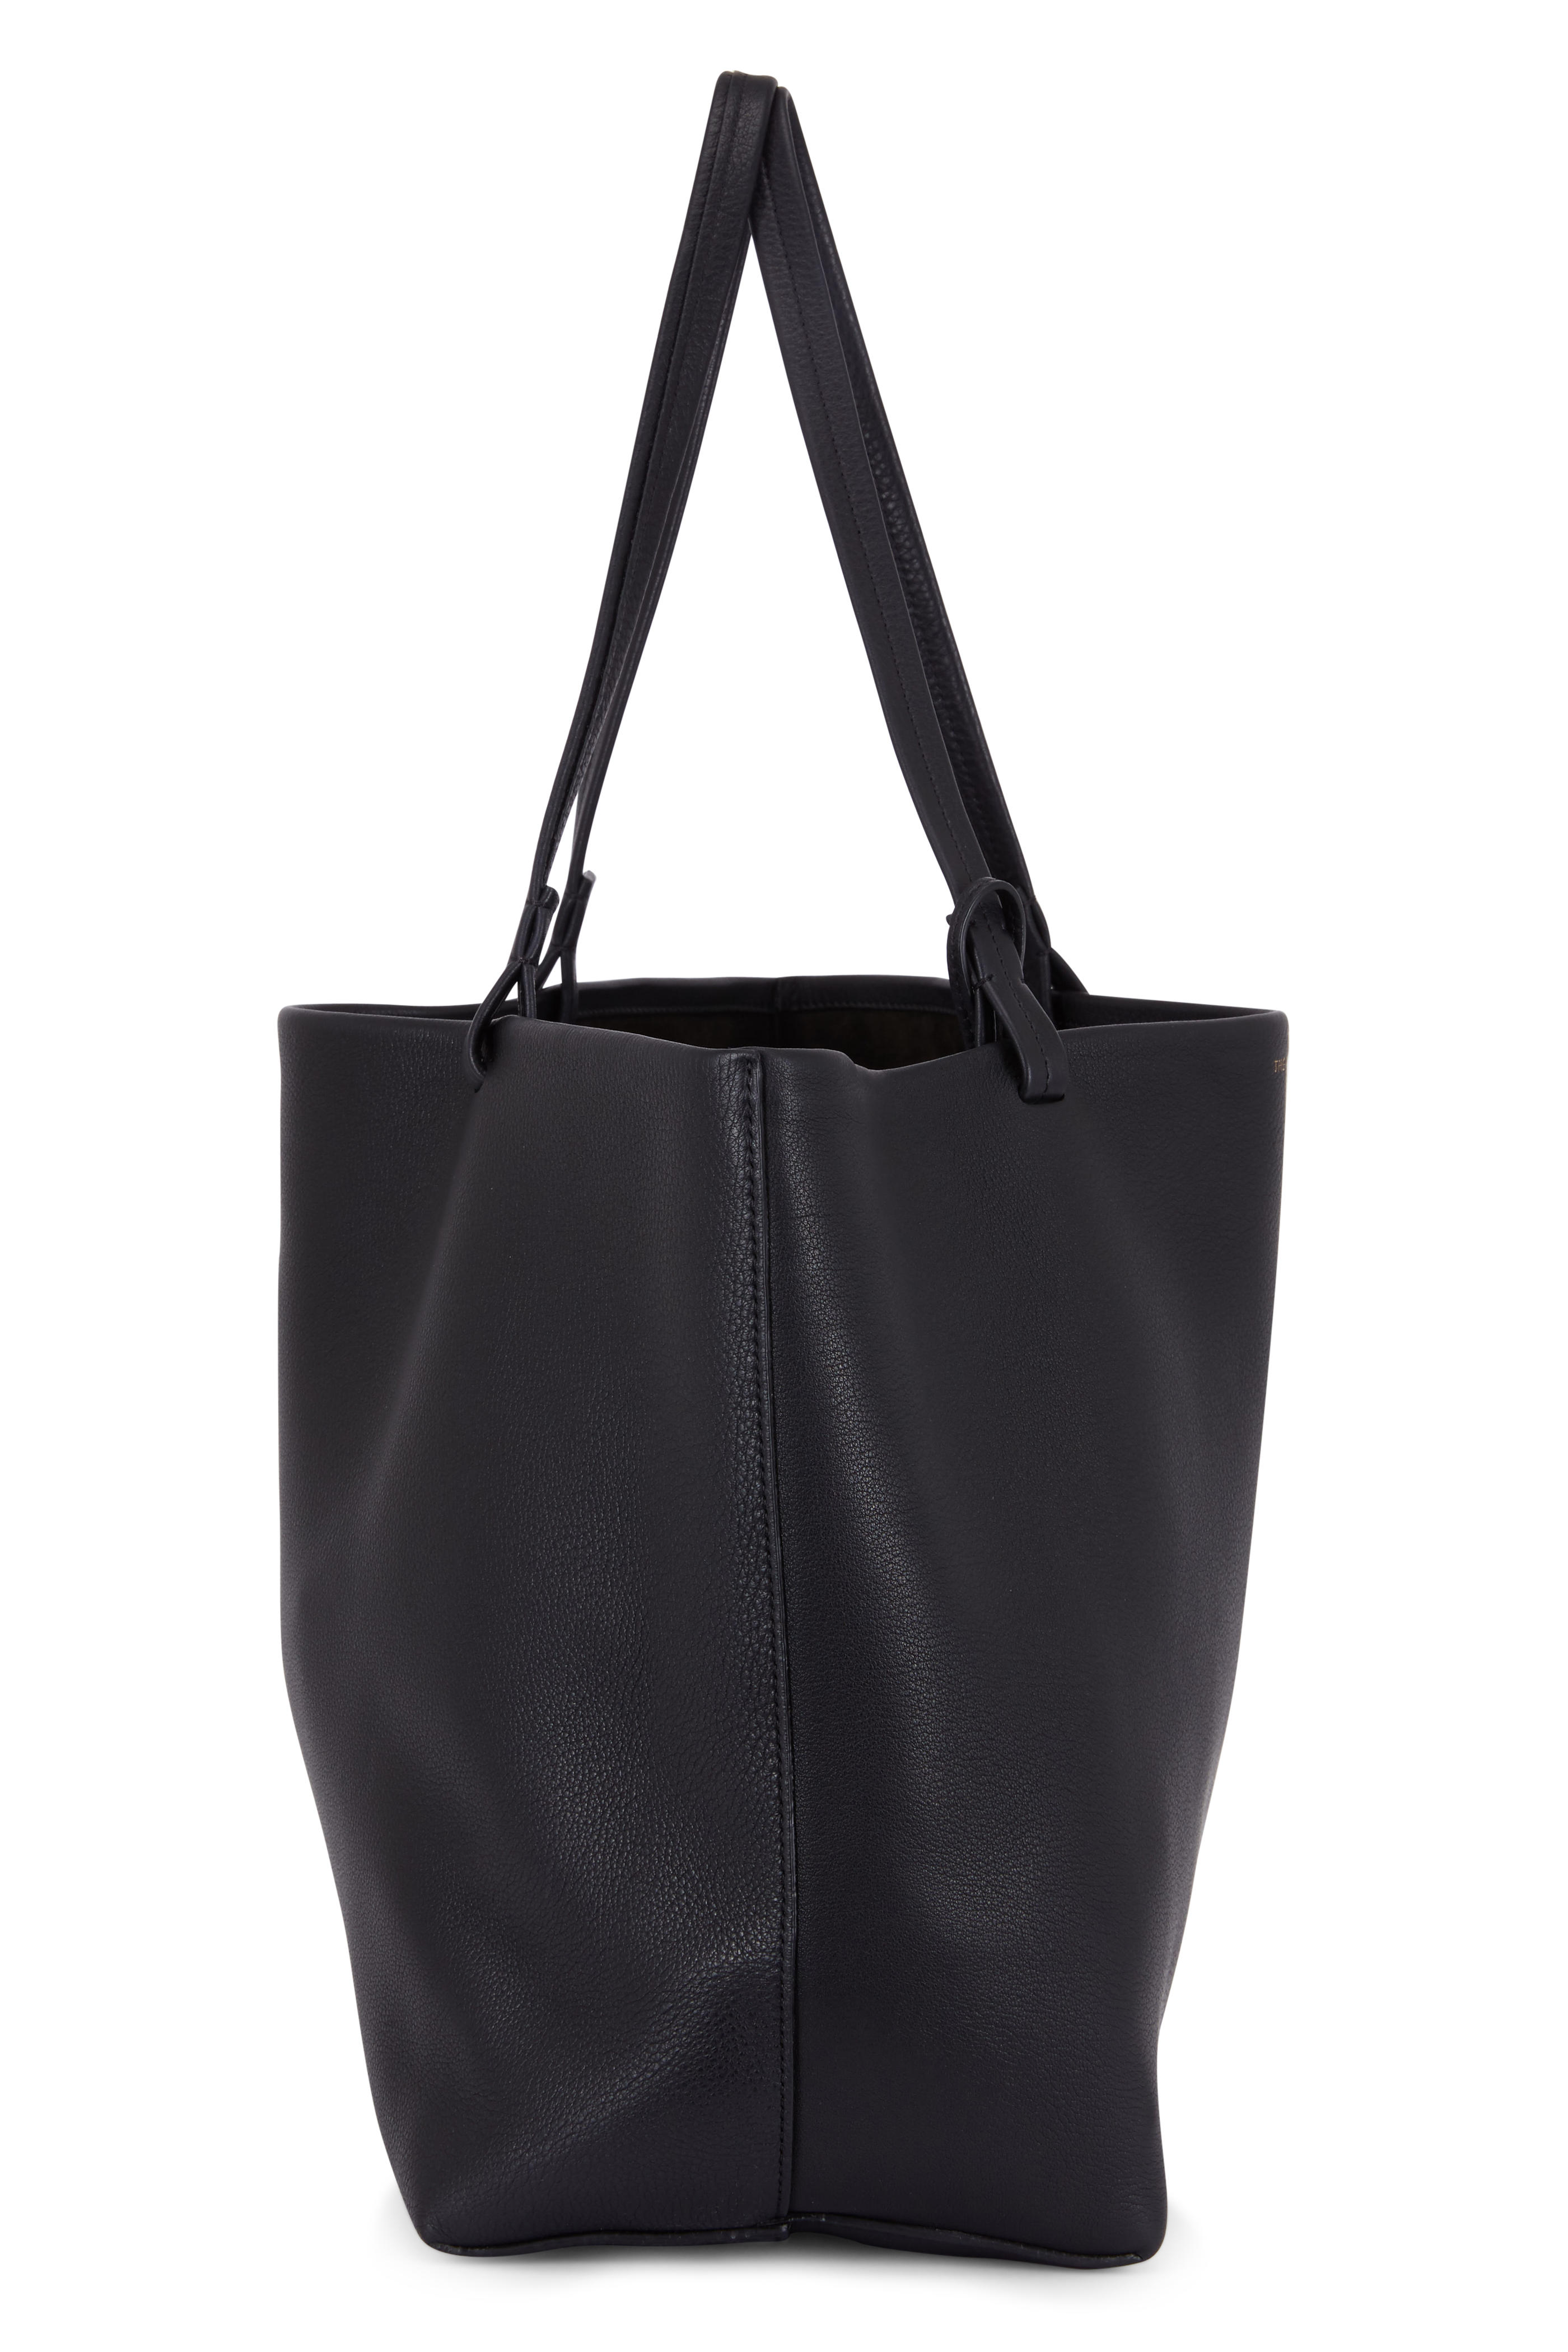 The Row - Park Black Grained Leather Tote Bag | Mitchell Stores